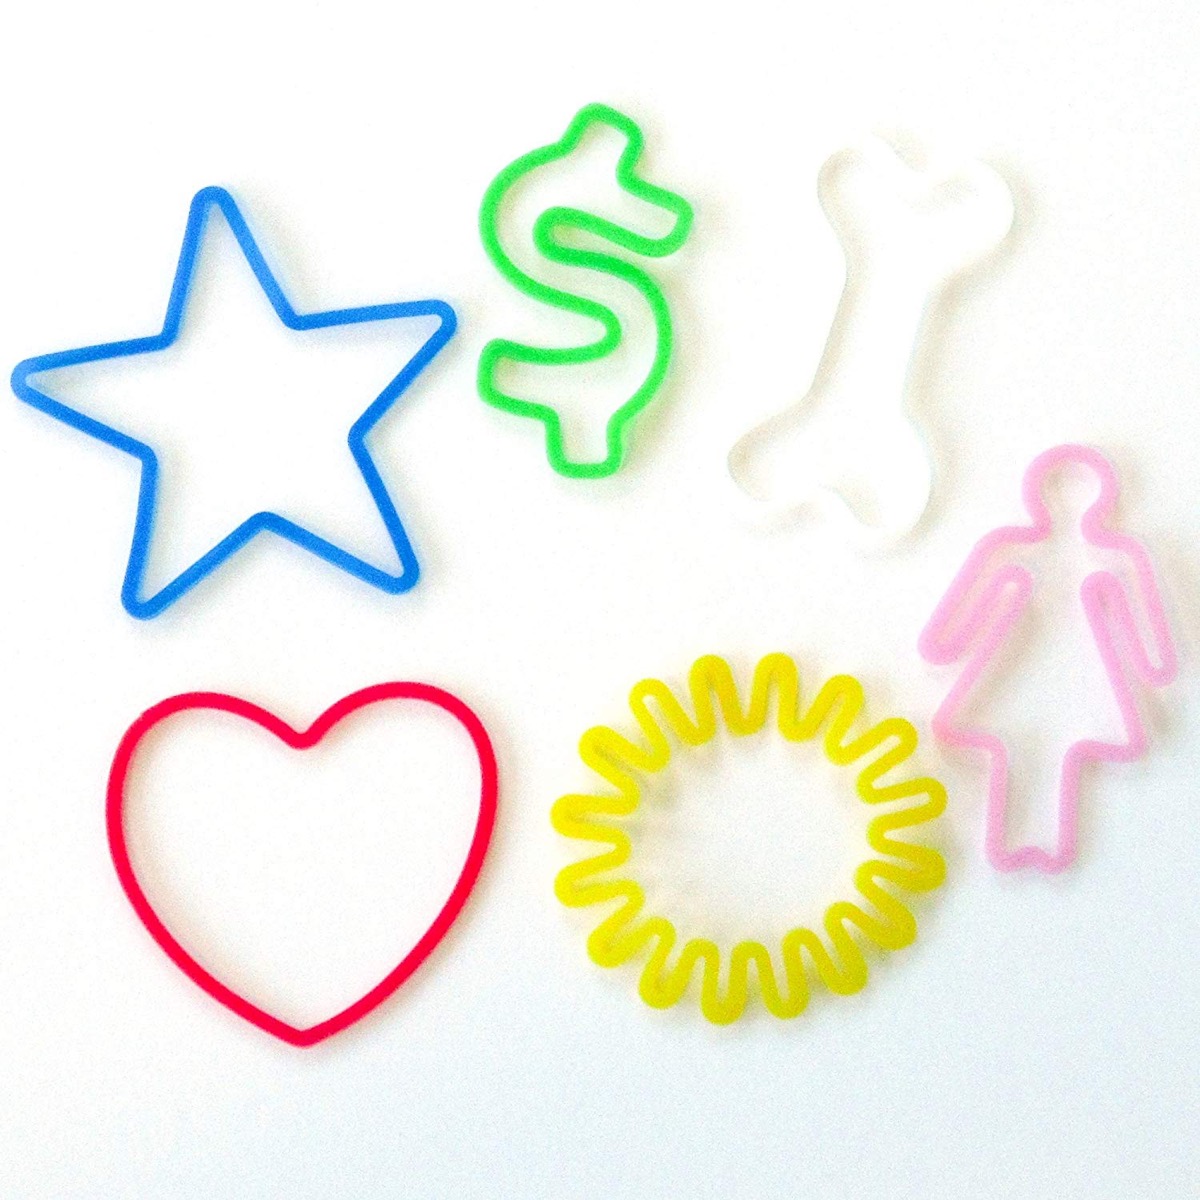 silly bandz coolest school accessory every year